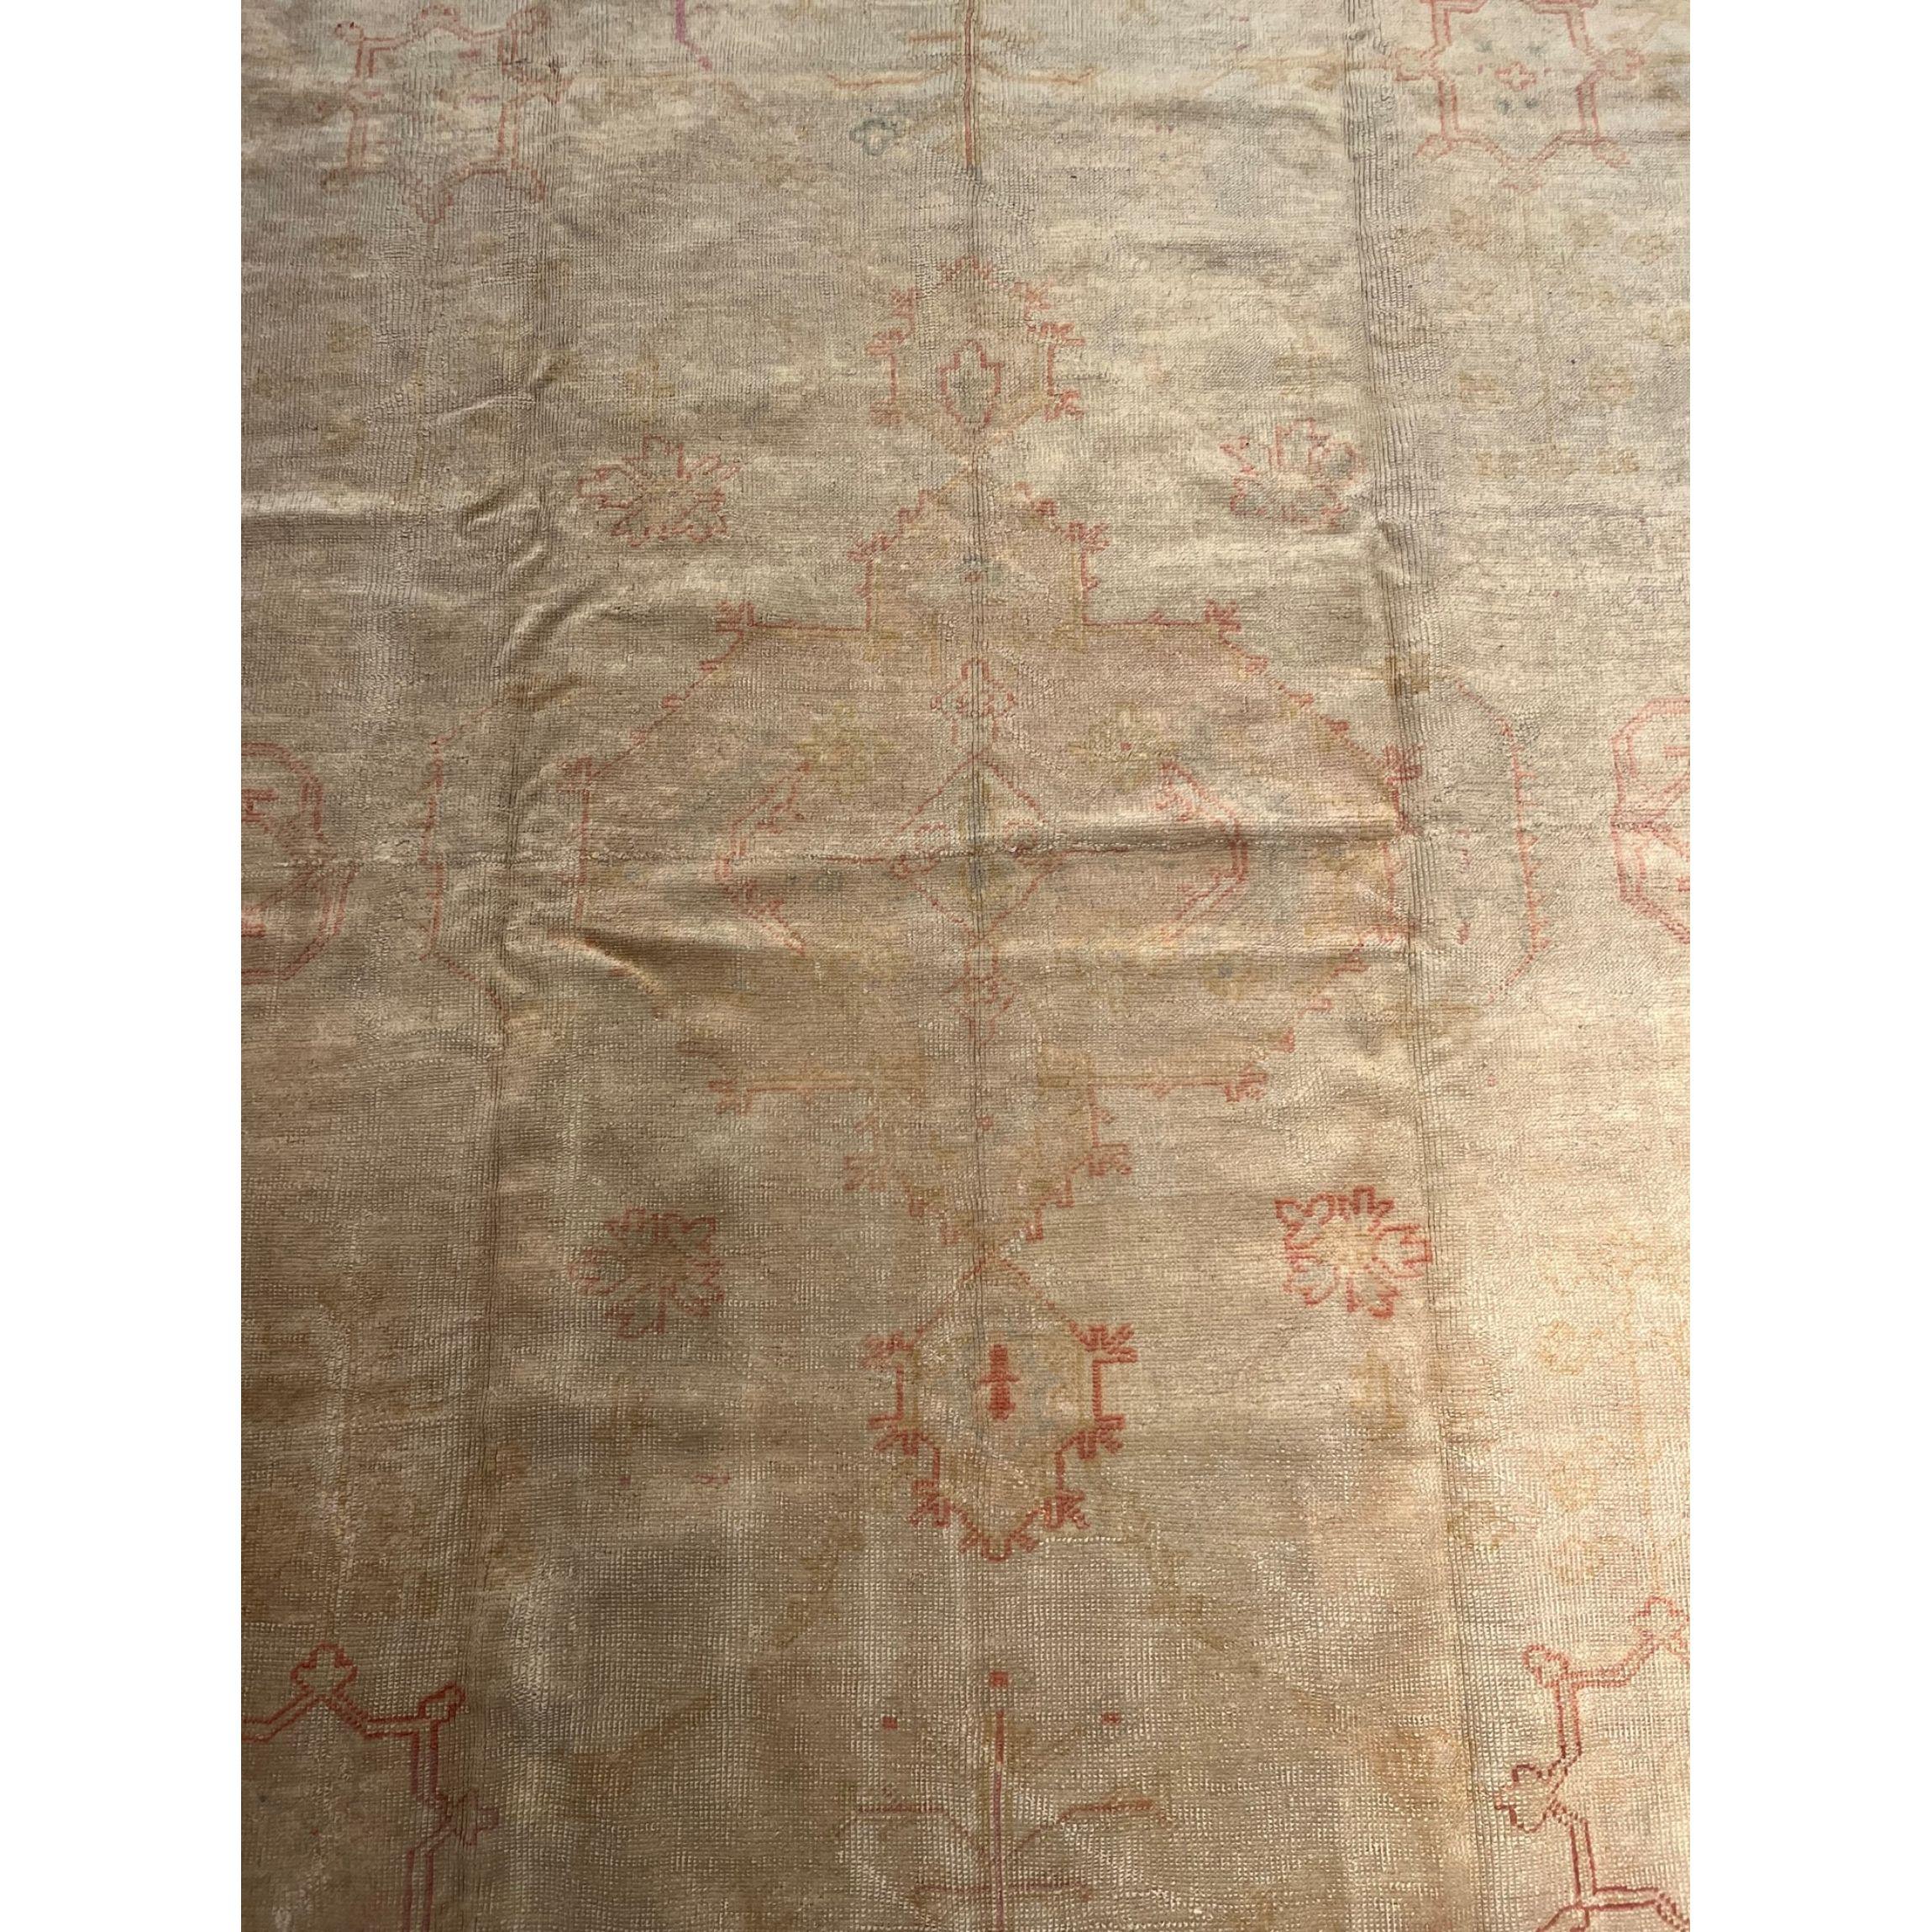 Oushak Antique Rug- 11.4x8.0 In Good Condition For Sale In Los Angeles, US